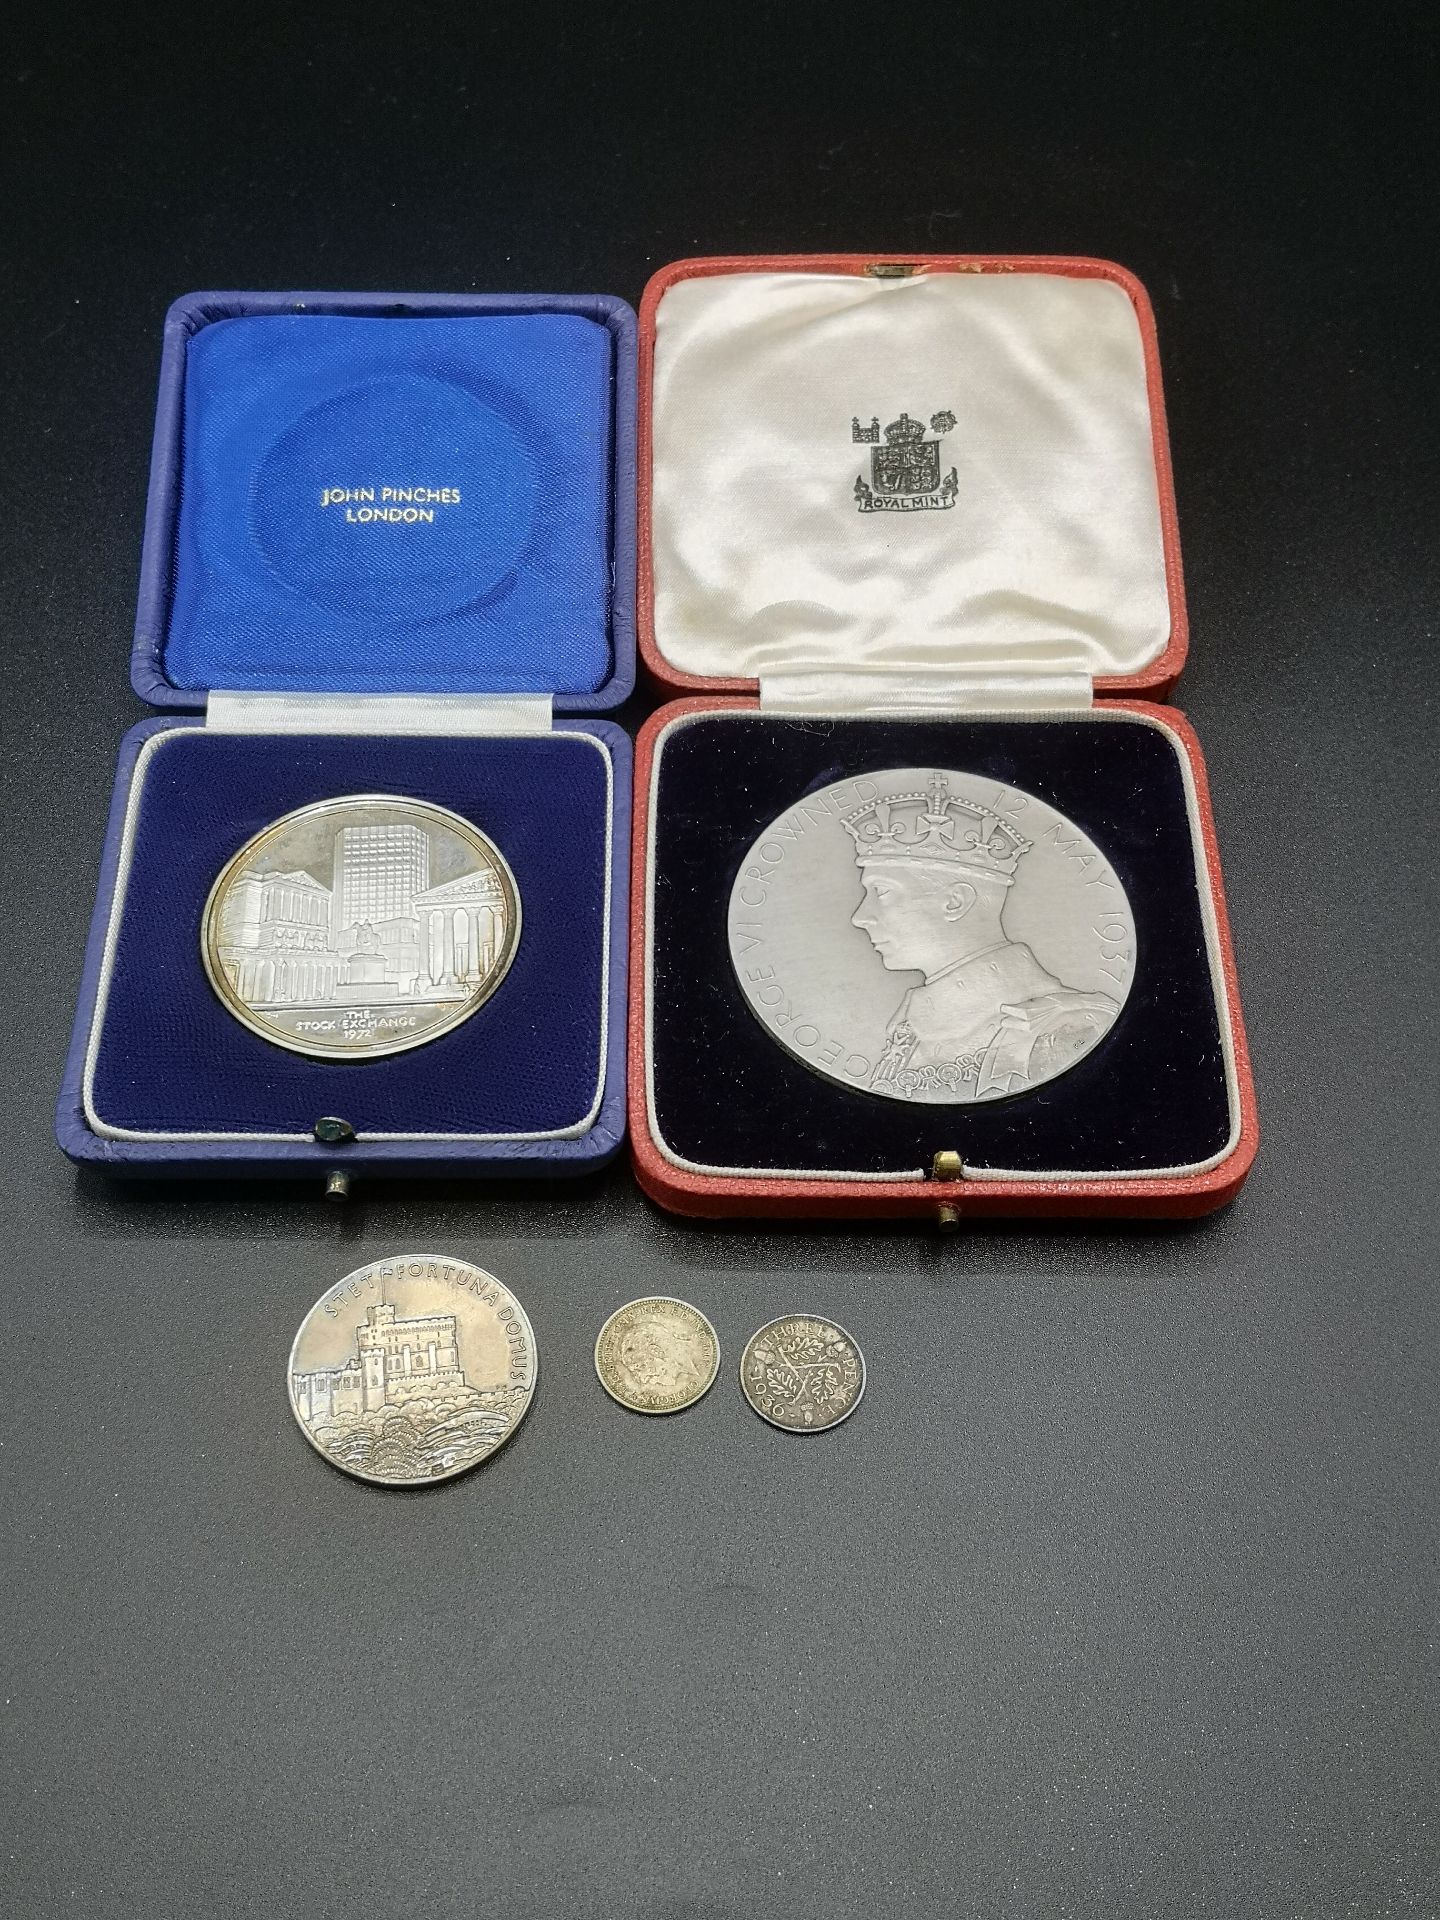 A Brokers' Medal, two other medals and coins